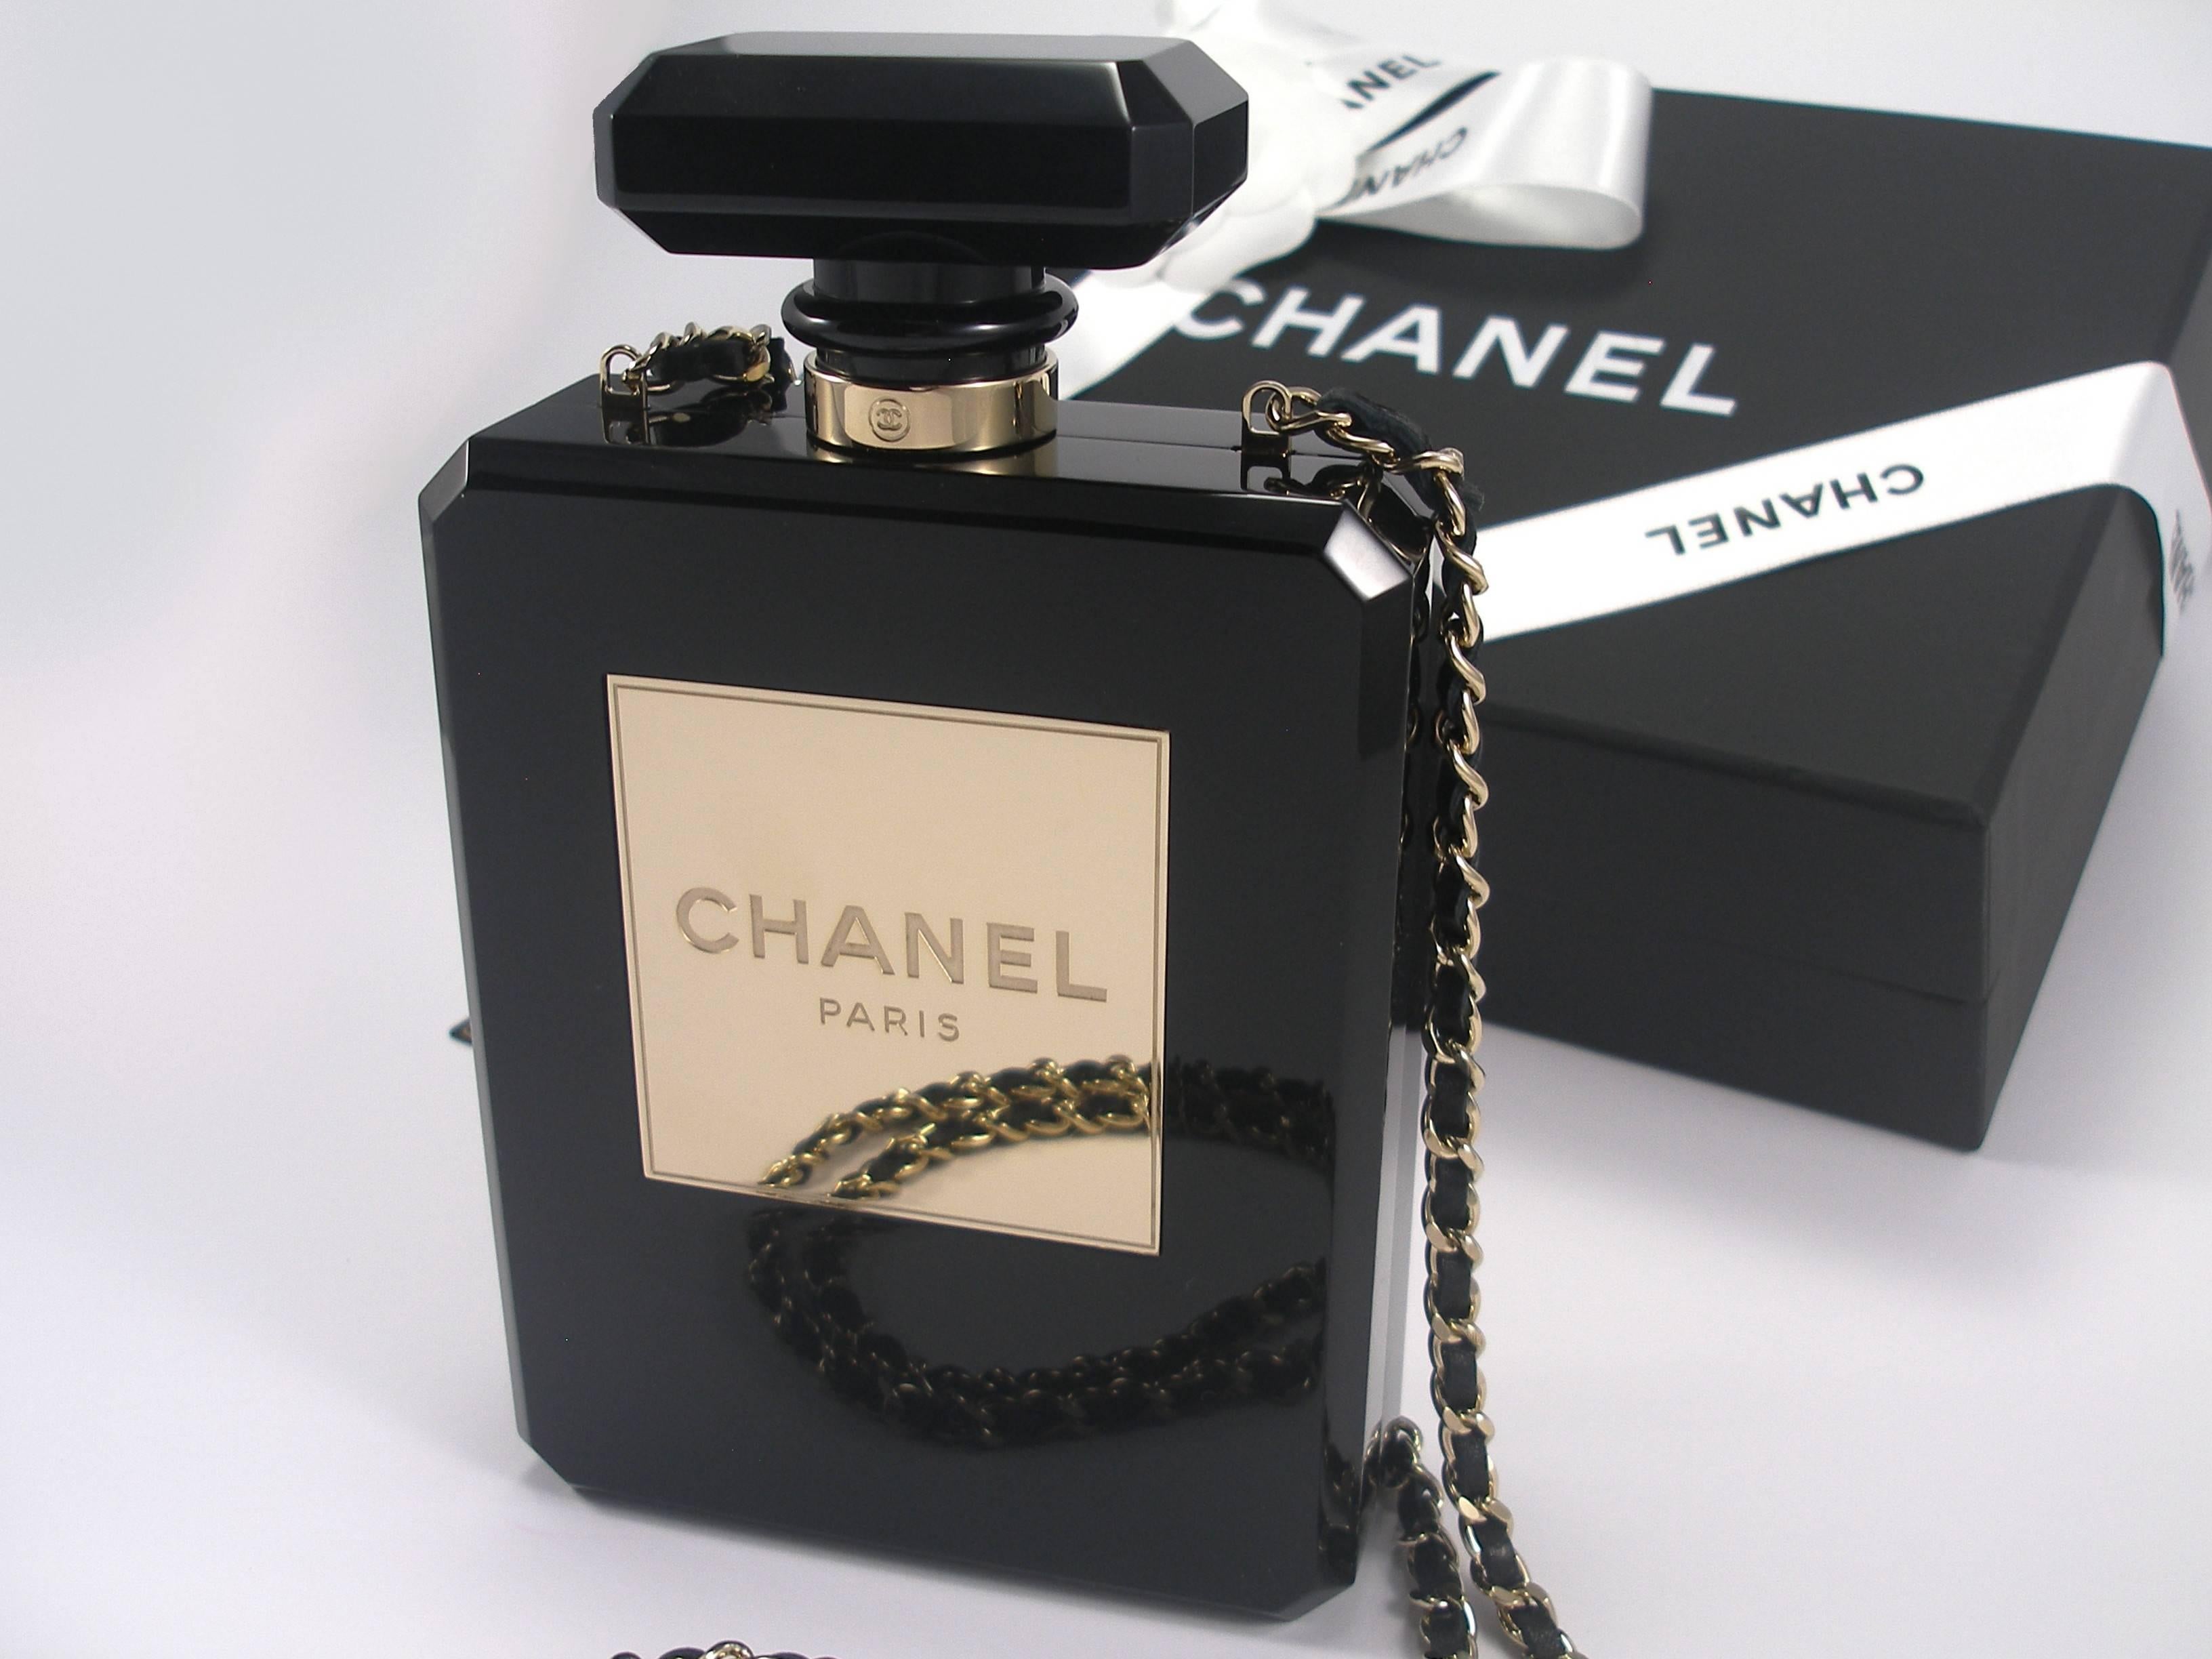 Chanel Black Perfume Bottle Bag Limited Edition / VERY RARE and COLLECTOR 2